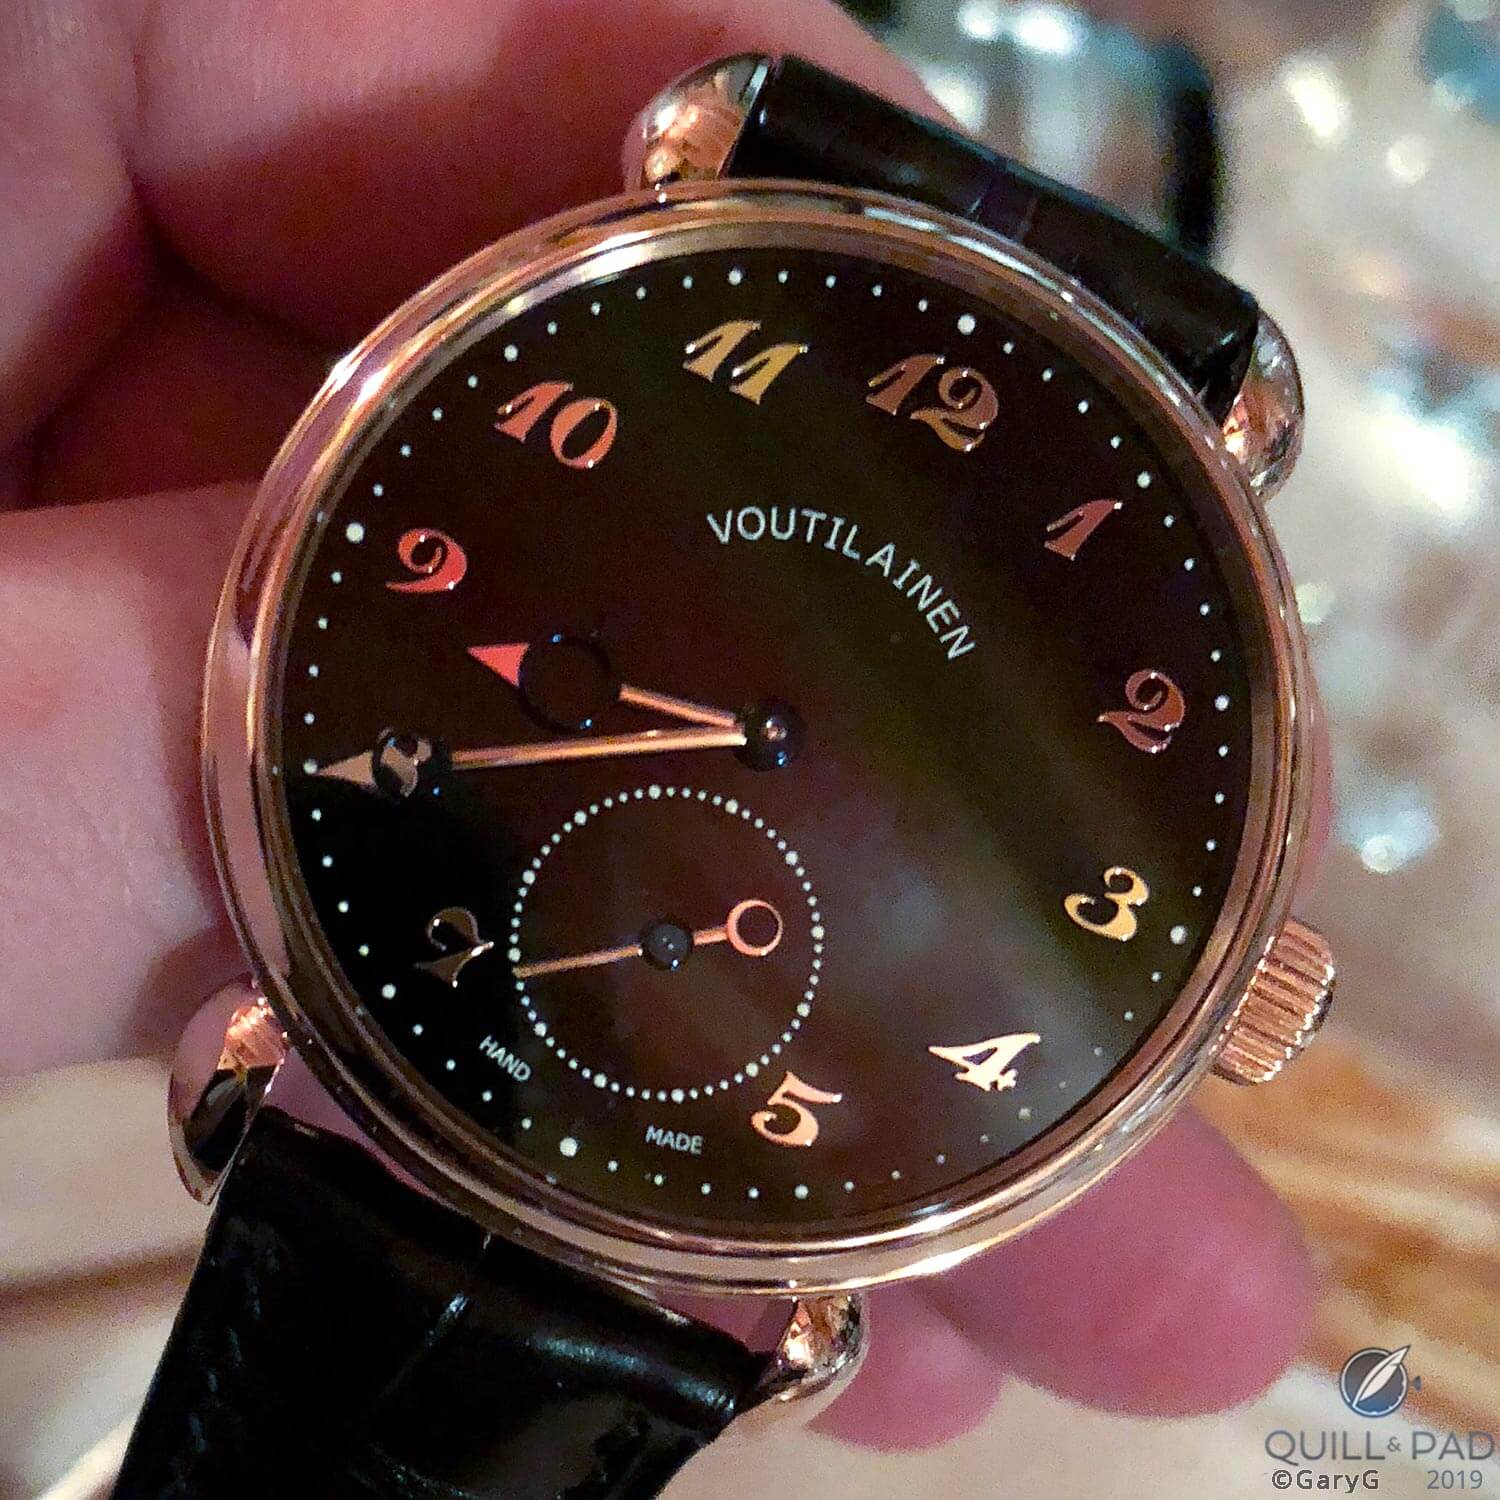 Voutilainen Vingt-8 in red gold with enamel dial and Breguet numerals